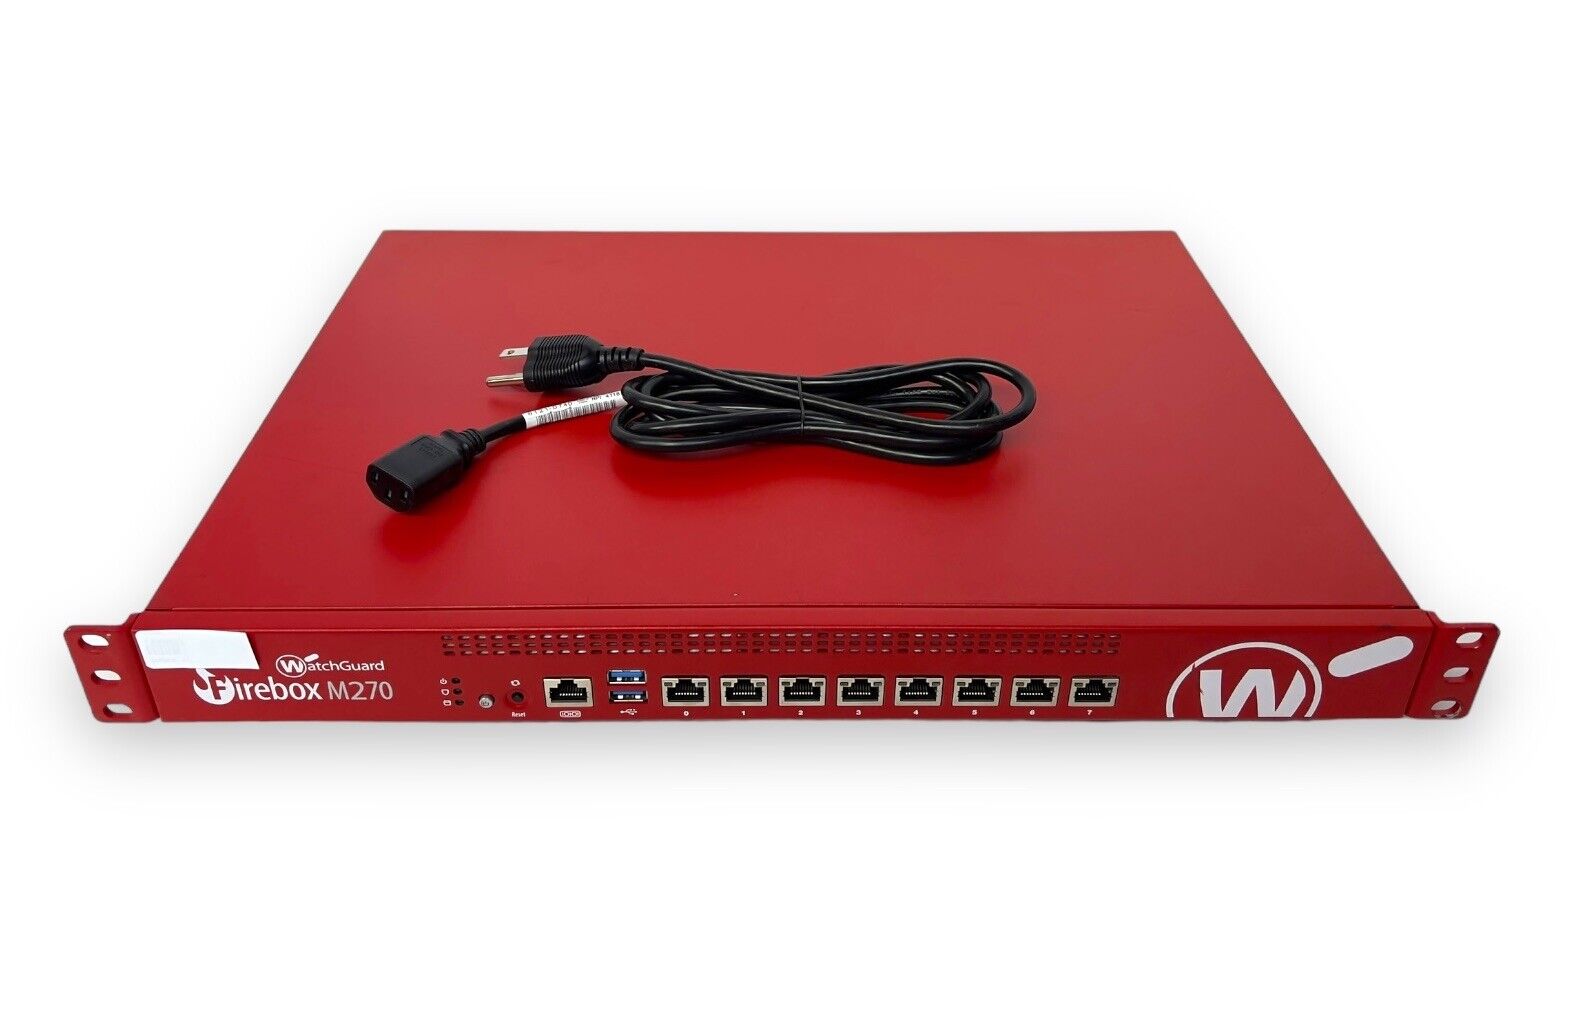 WatchGuard Firebox M270 Security Appliance TL2AE8- Unclaimed